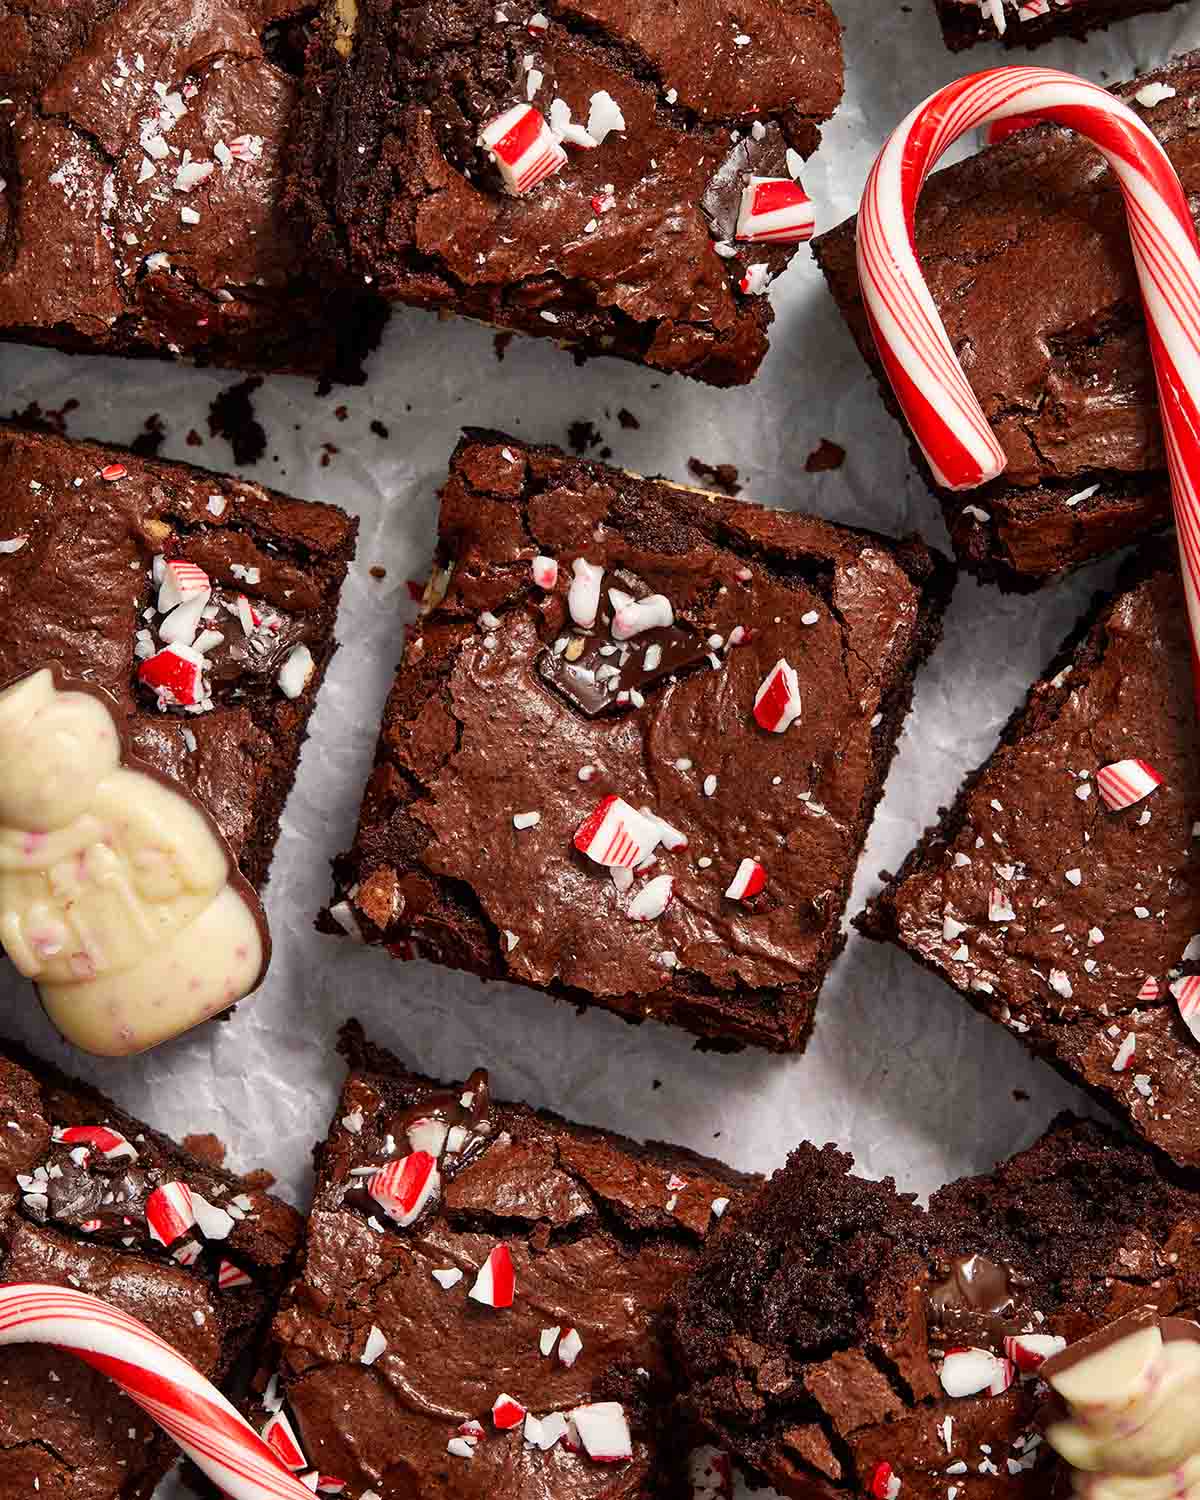 Brownies arranged on parchment paper with candy canes and peppermint bark.